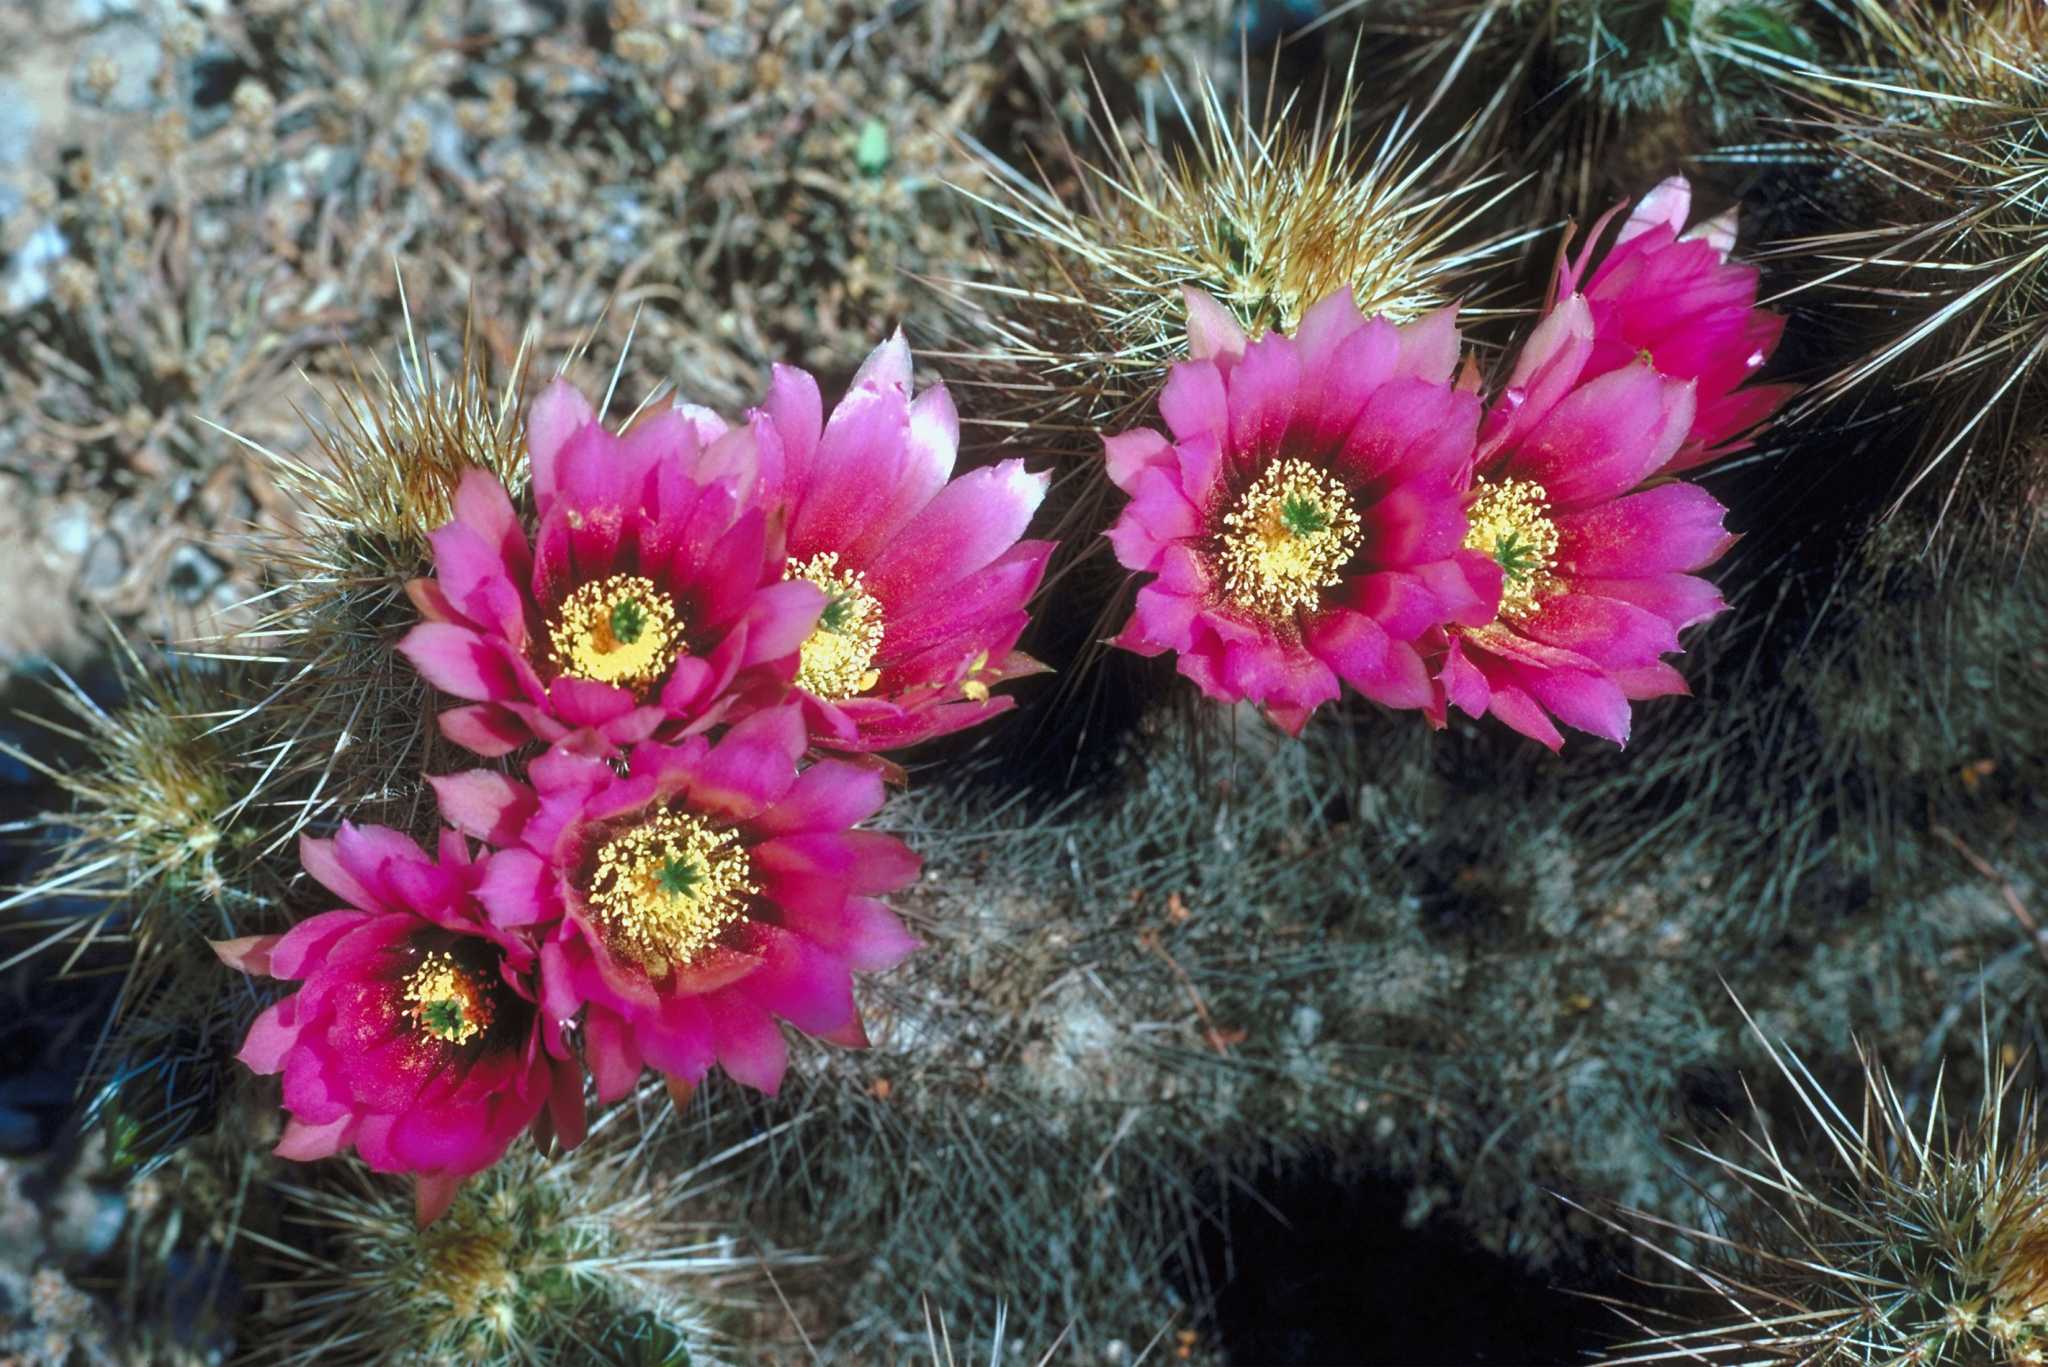 How Many Times Does a Cactus Reproduce in a Lifetime?